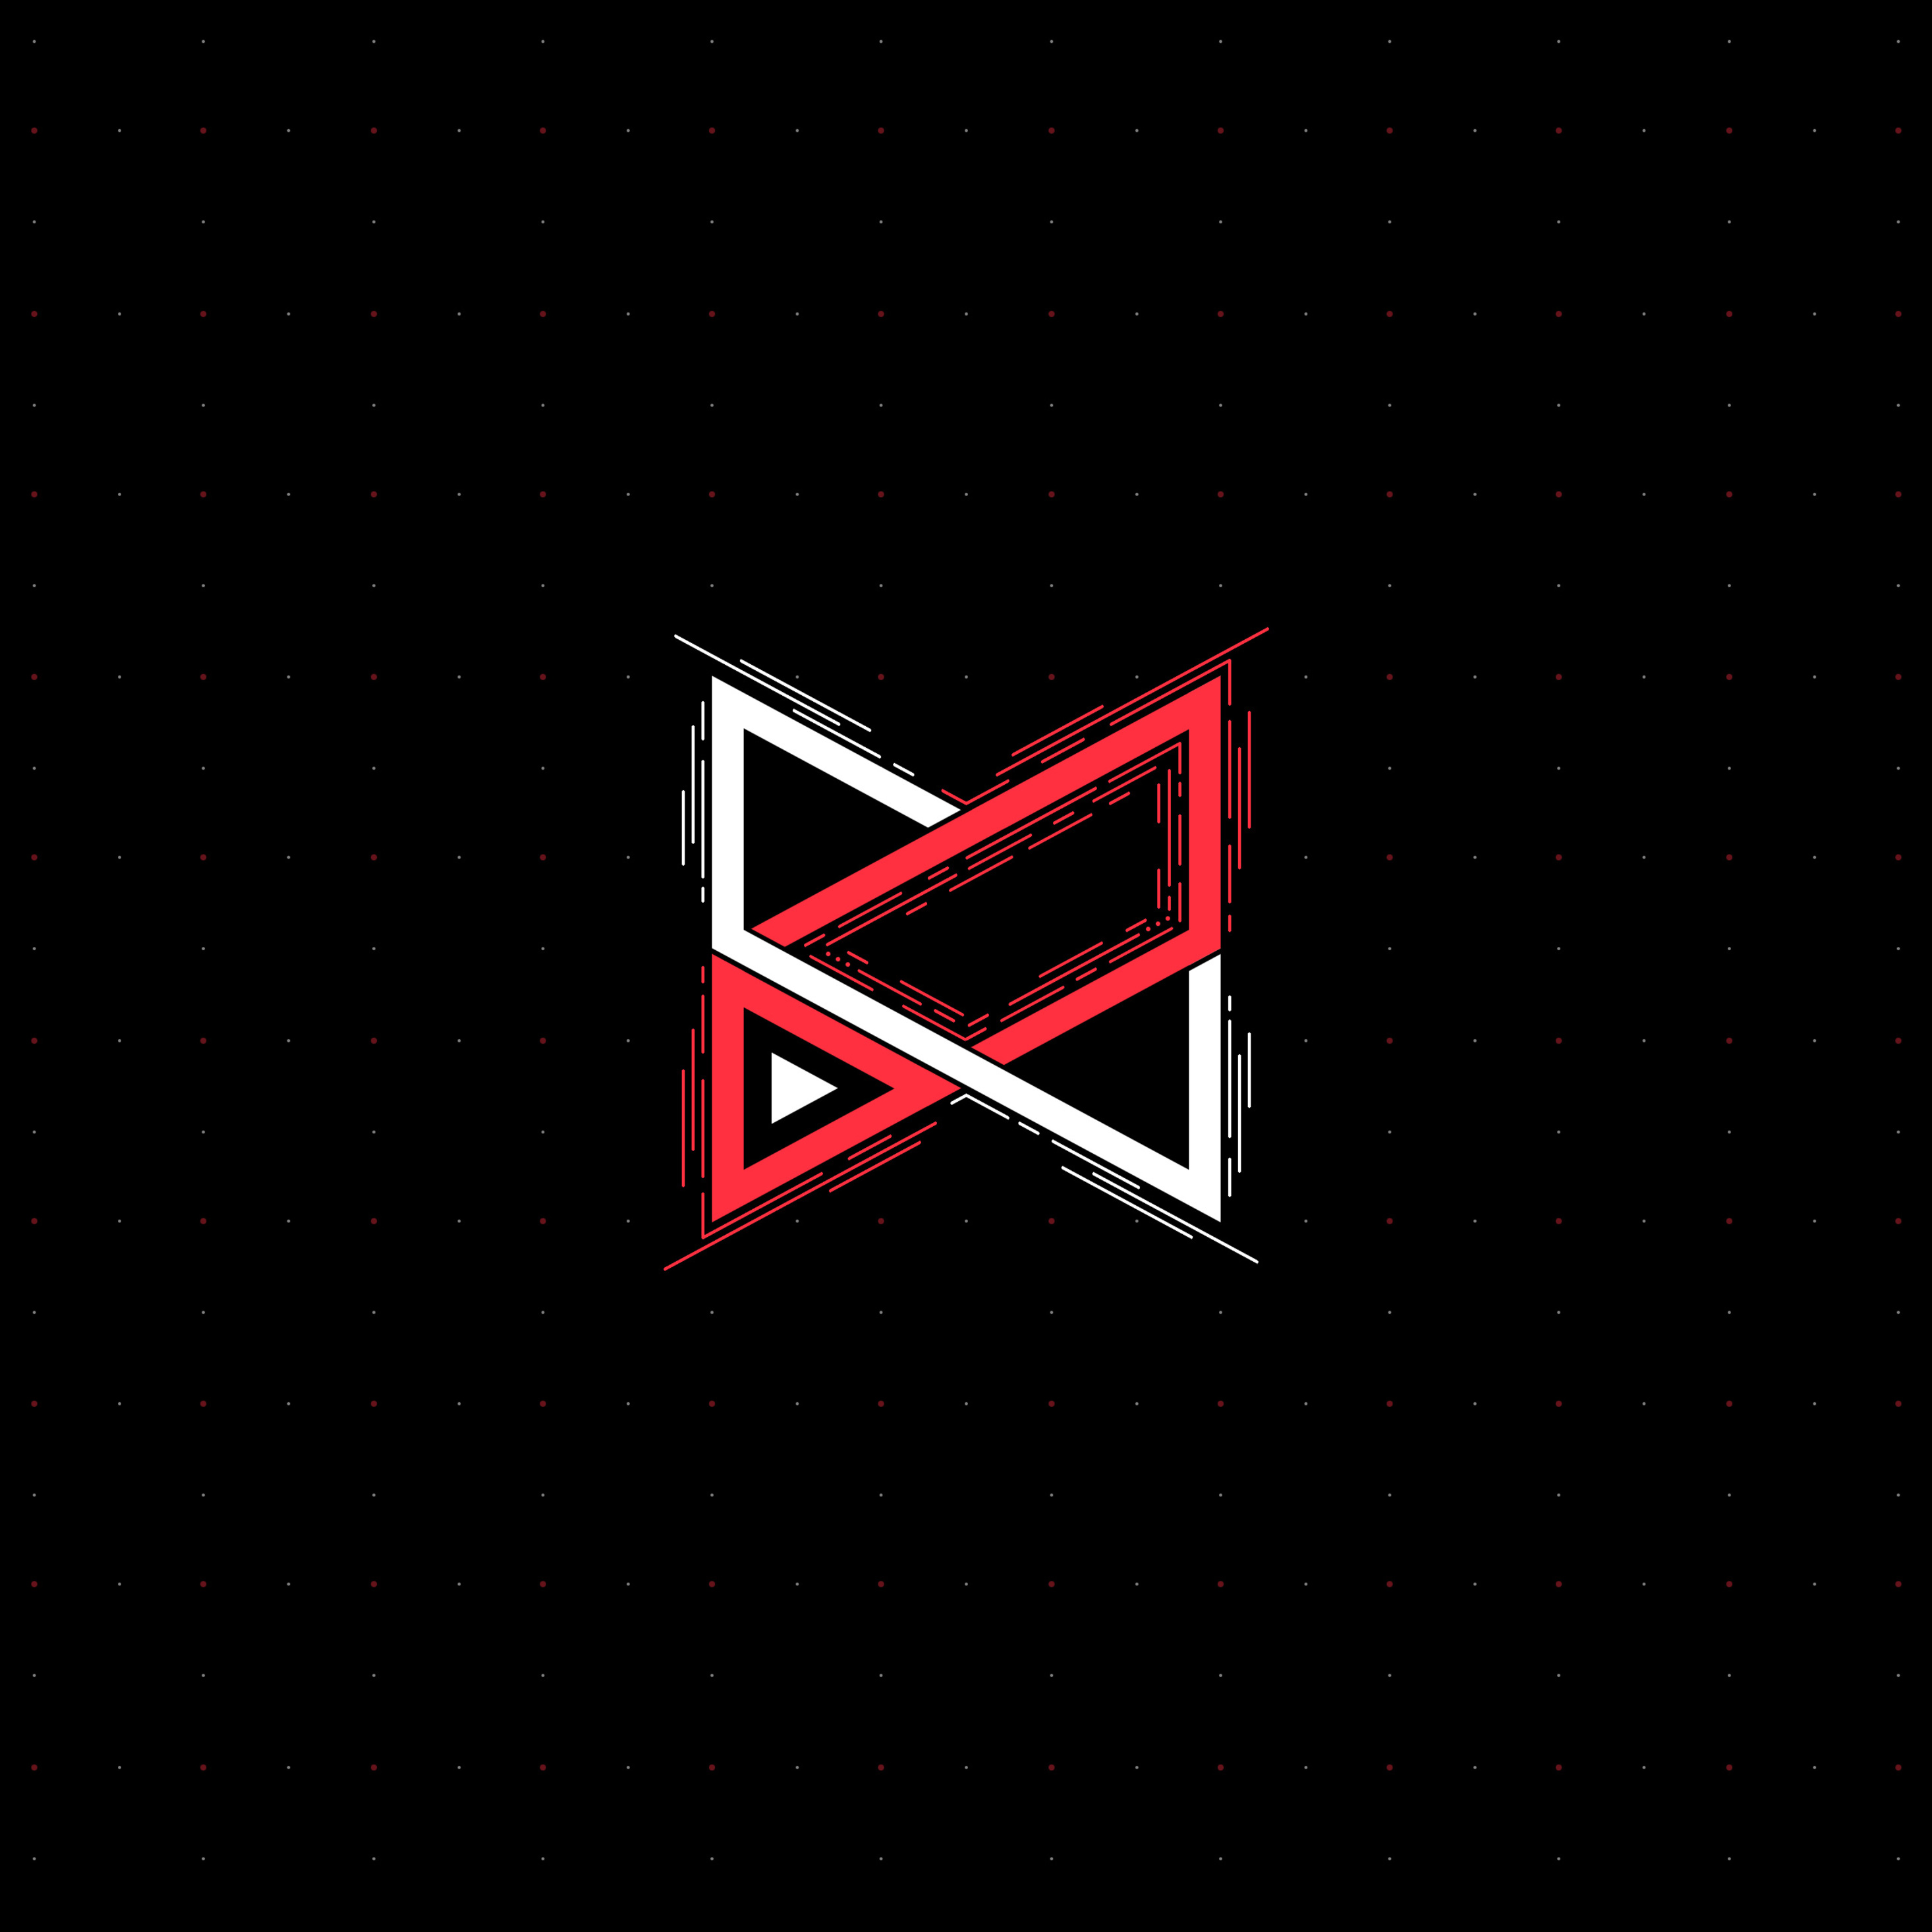 2932x2932 MKBHD Logo 4k Ipad Pro Retina Display HD 4k Wallpapers, Images,  Backgrounds, Photos and Pictures